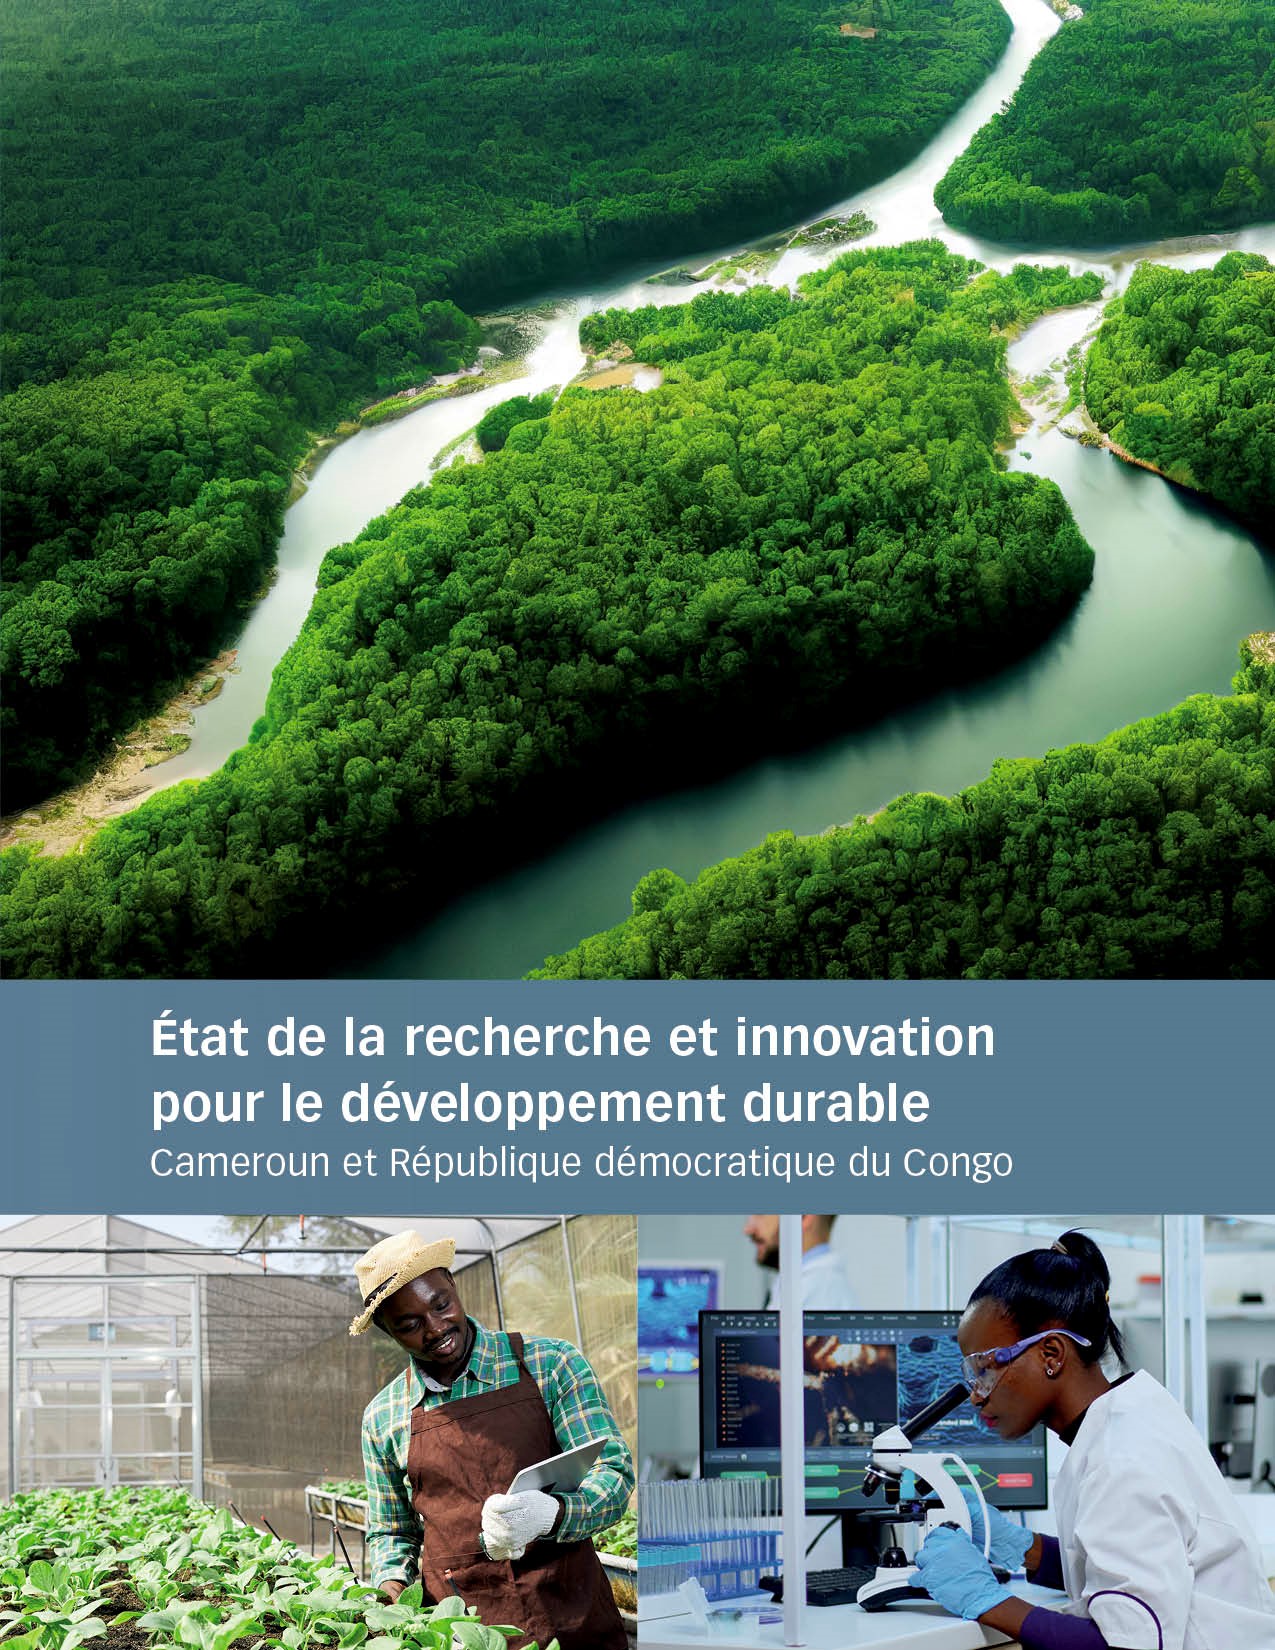 PDTIE – The state of research and innovation for sustainable development: Cameroon and the Democratic Republic of Congo